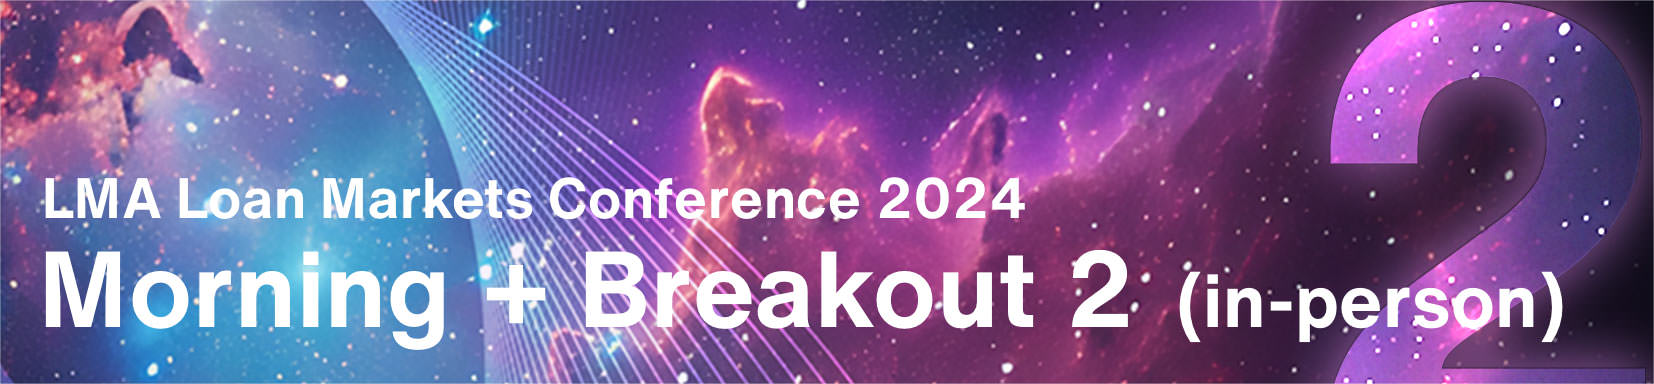 Morning + Breakout 2 (in-person) - LMA Loan Markets Conference, 17 September 2024